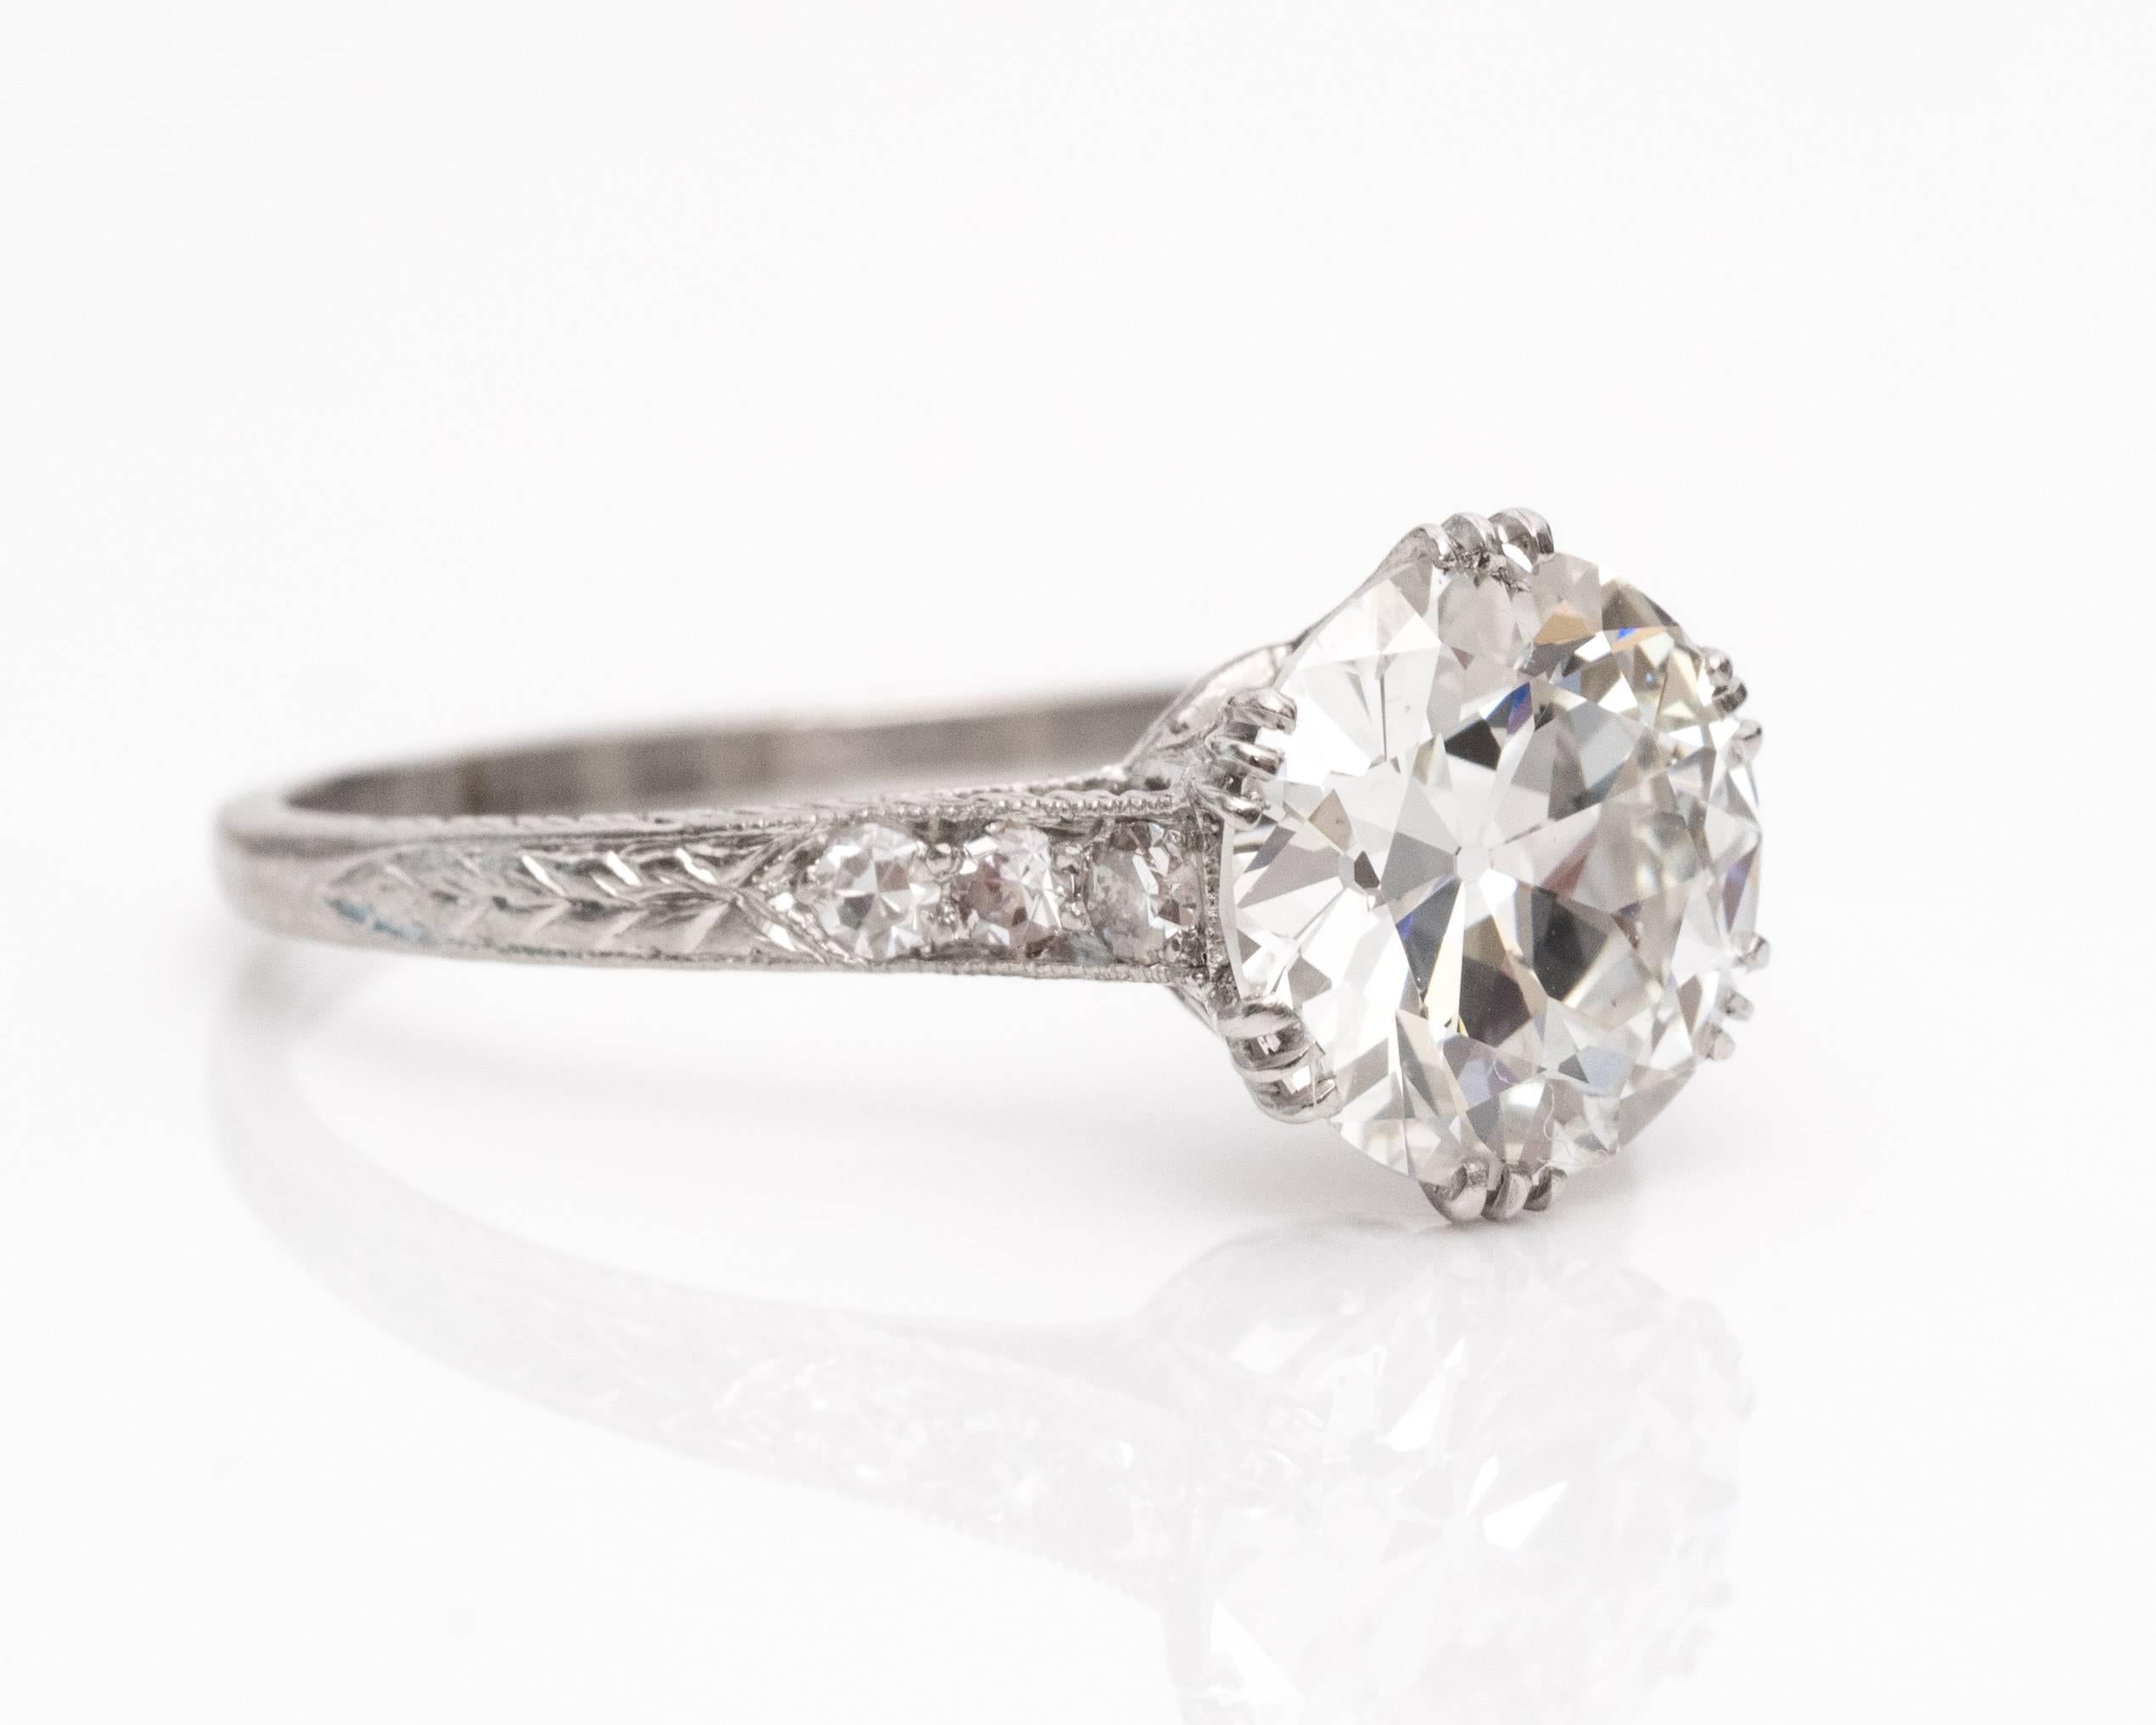 GIA Certified 2.01 Carat Diamond Platinum Engagement Ring. This 1920s diamond and platinum handcrafted ring embodies Art Nouveau and Edwardian motifs. The GIA certified center stone is an Old European shape weighing a hefty 2.01 carats. The diamond